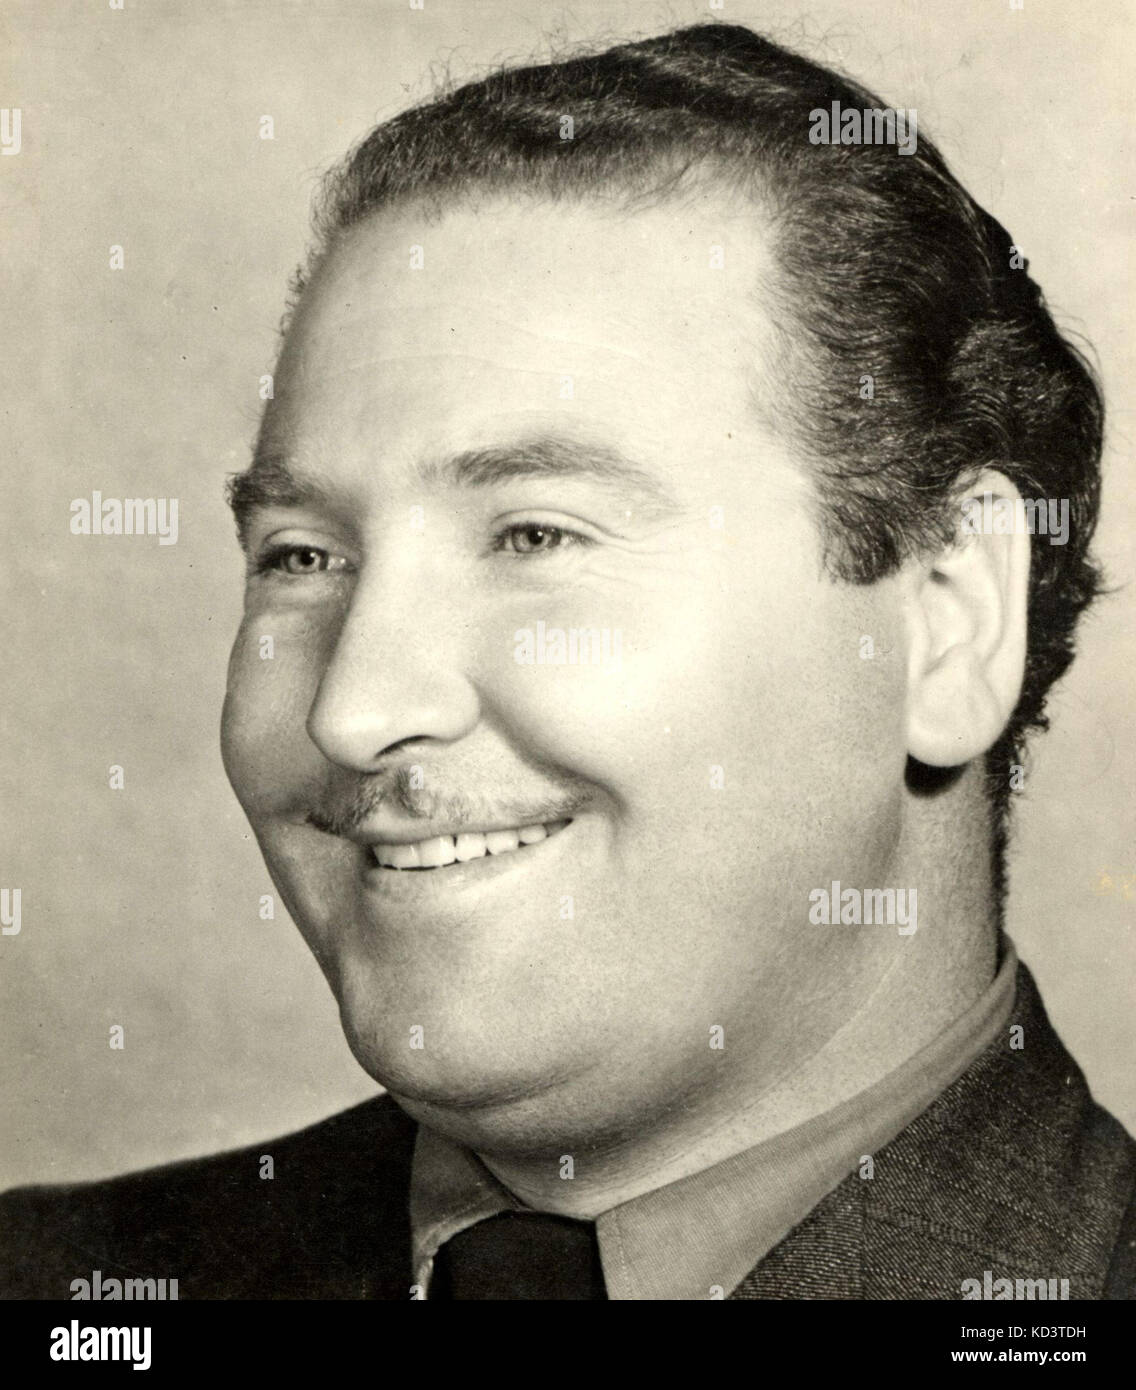 Josef Locke portrait. Irish singer (famous for When it's moonlight in Mayo, The Bard of Armach etc). Original name was Joseph McLaughlin 23 March 1917 - 15 October 1999 Stock Photo